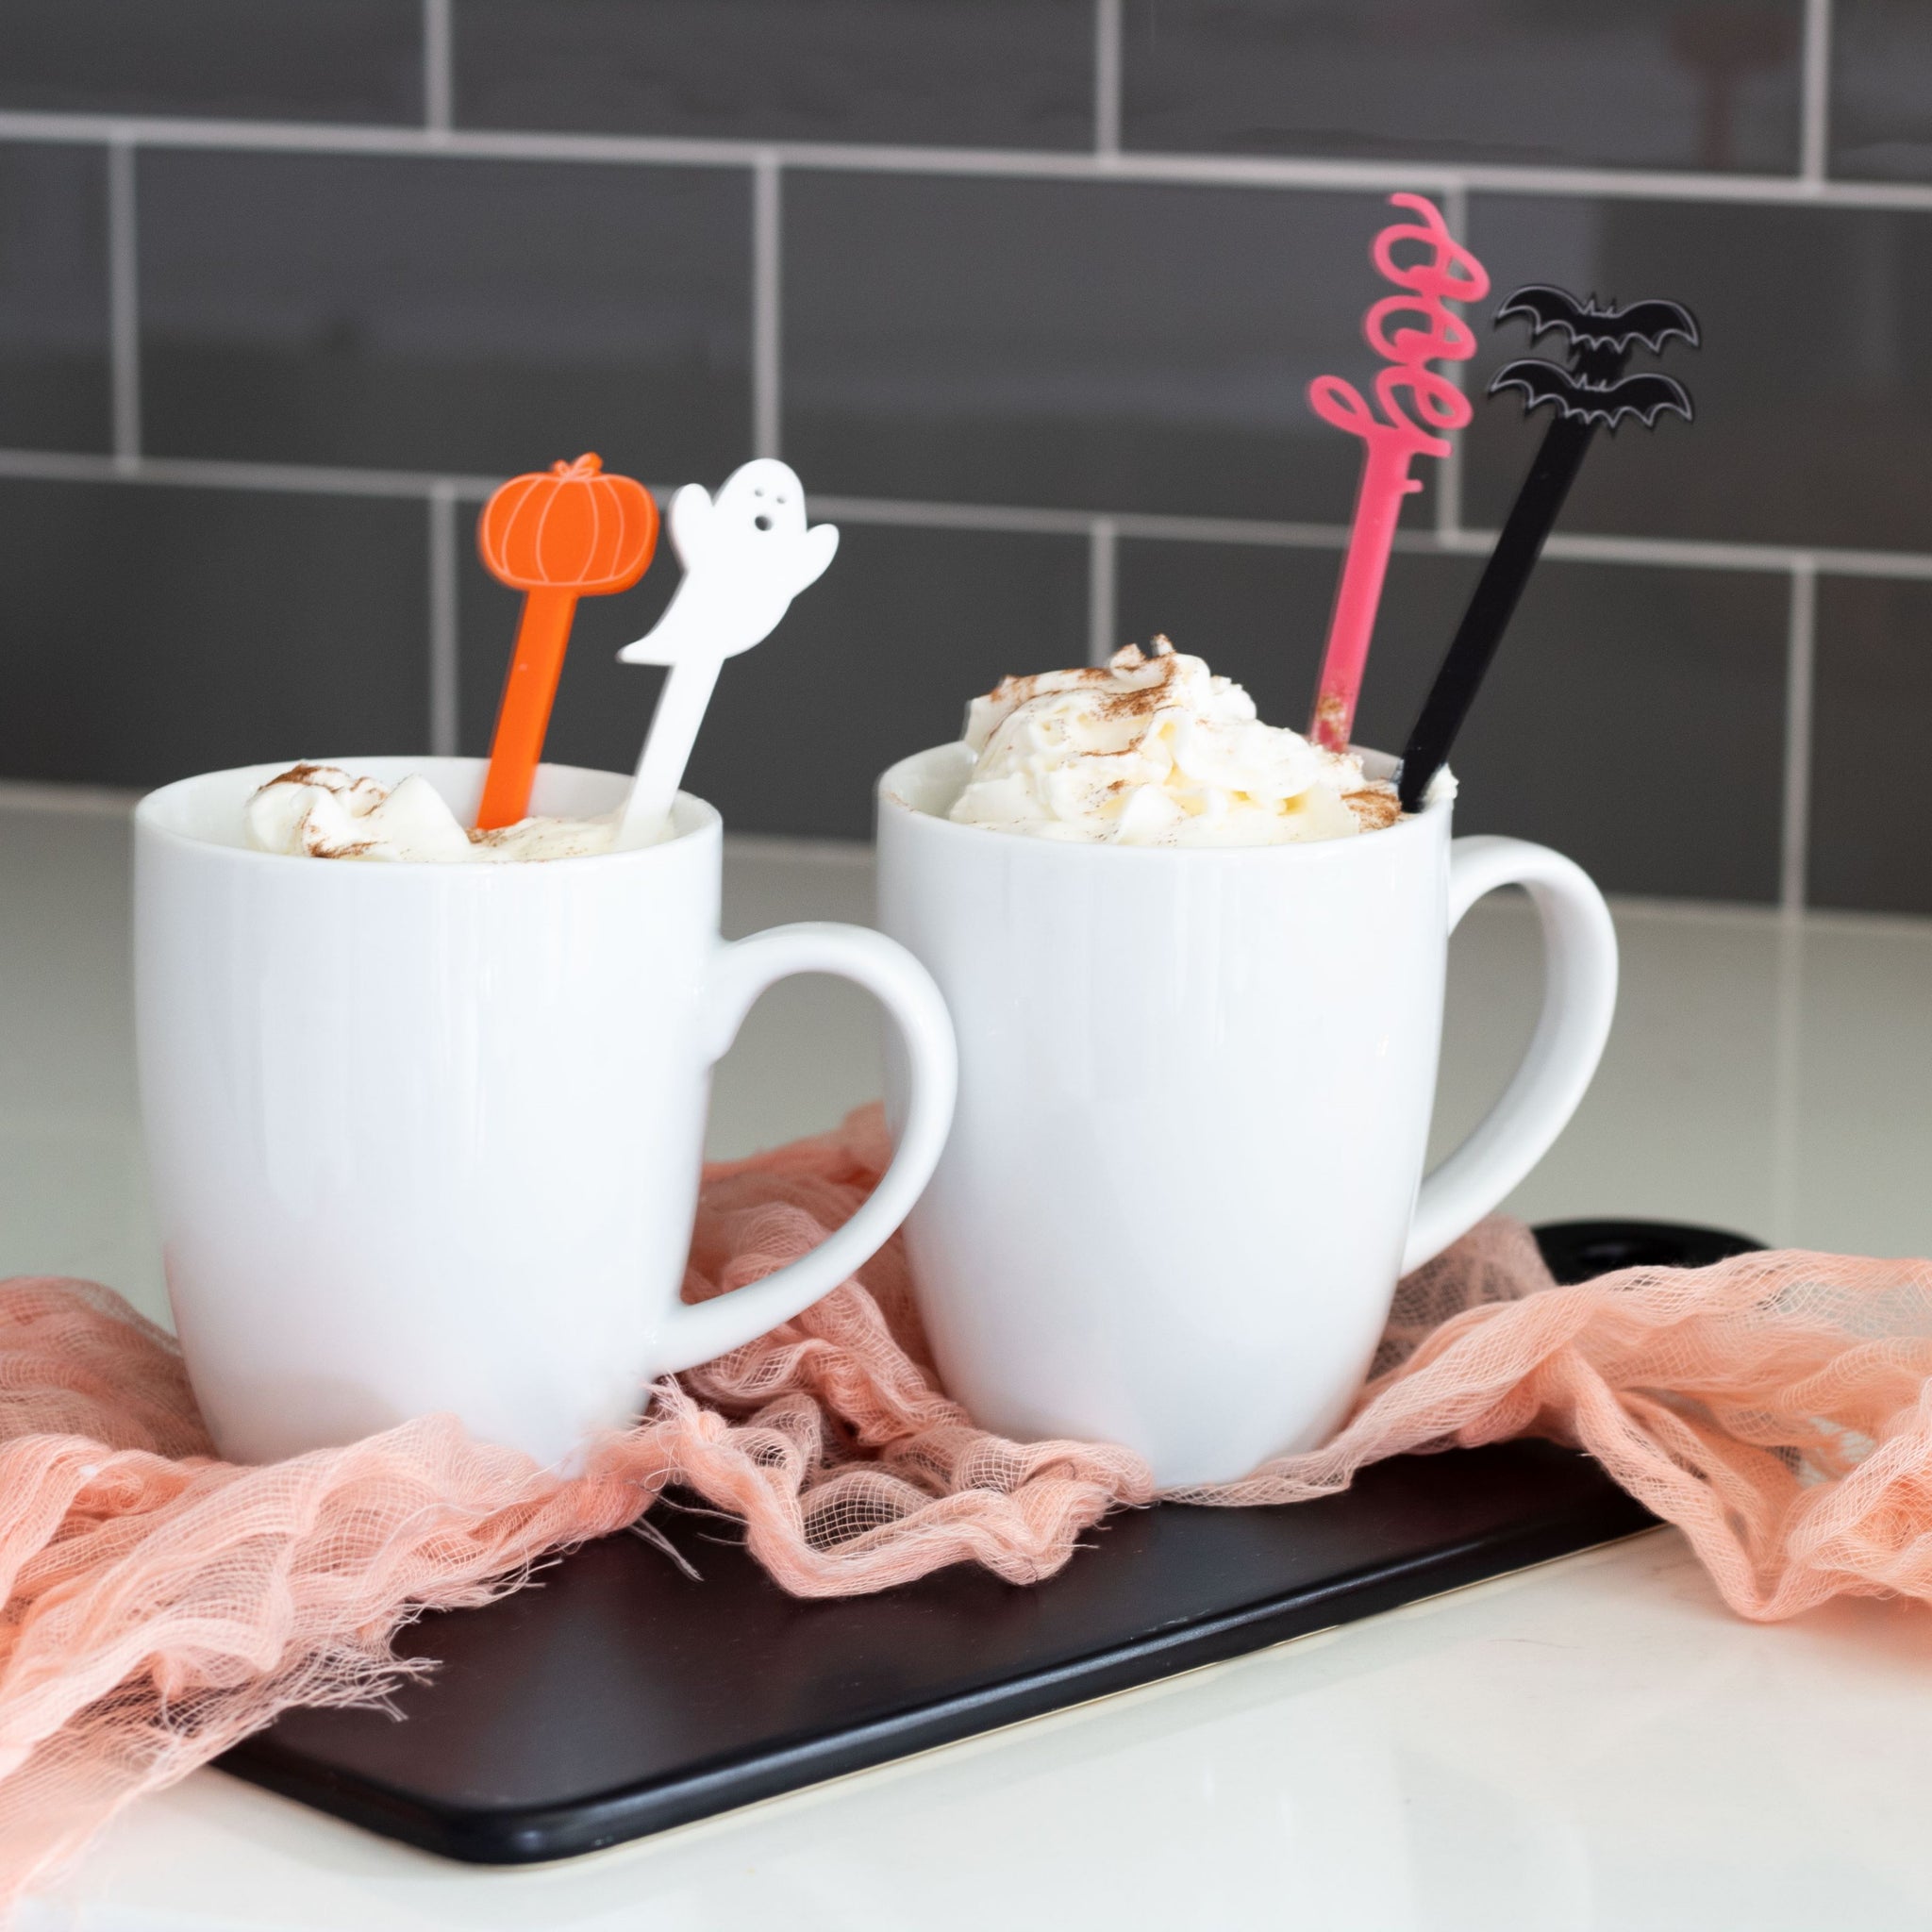 Halloween Party and Bar Decor - Ghost Drink Stirrers Set – fioribelle